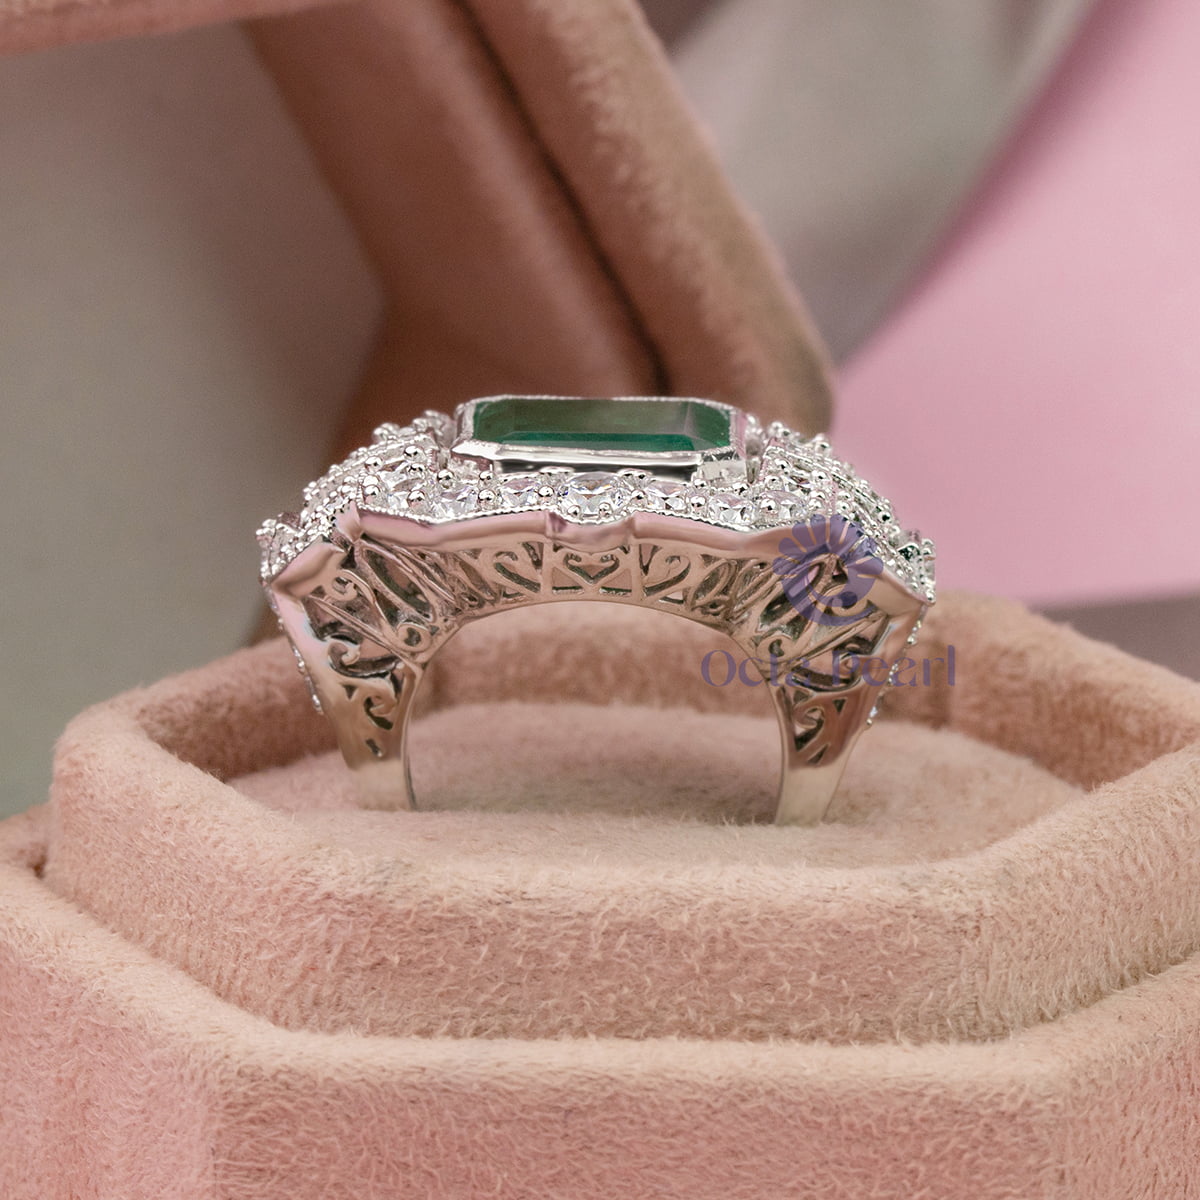 Bezel Set Green Asscher With Surrounded Halo Set Round CZ Stone Art Deco Style Square Ring (11 3/5 TCW)